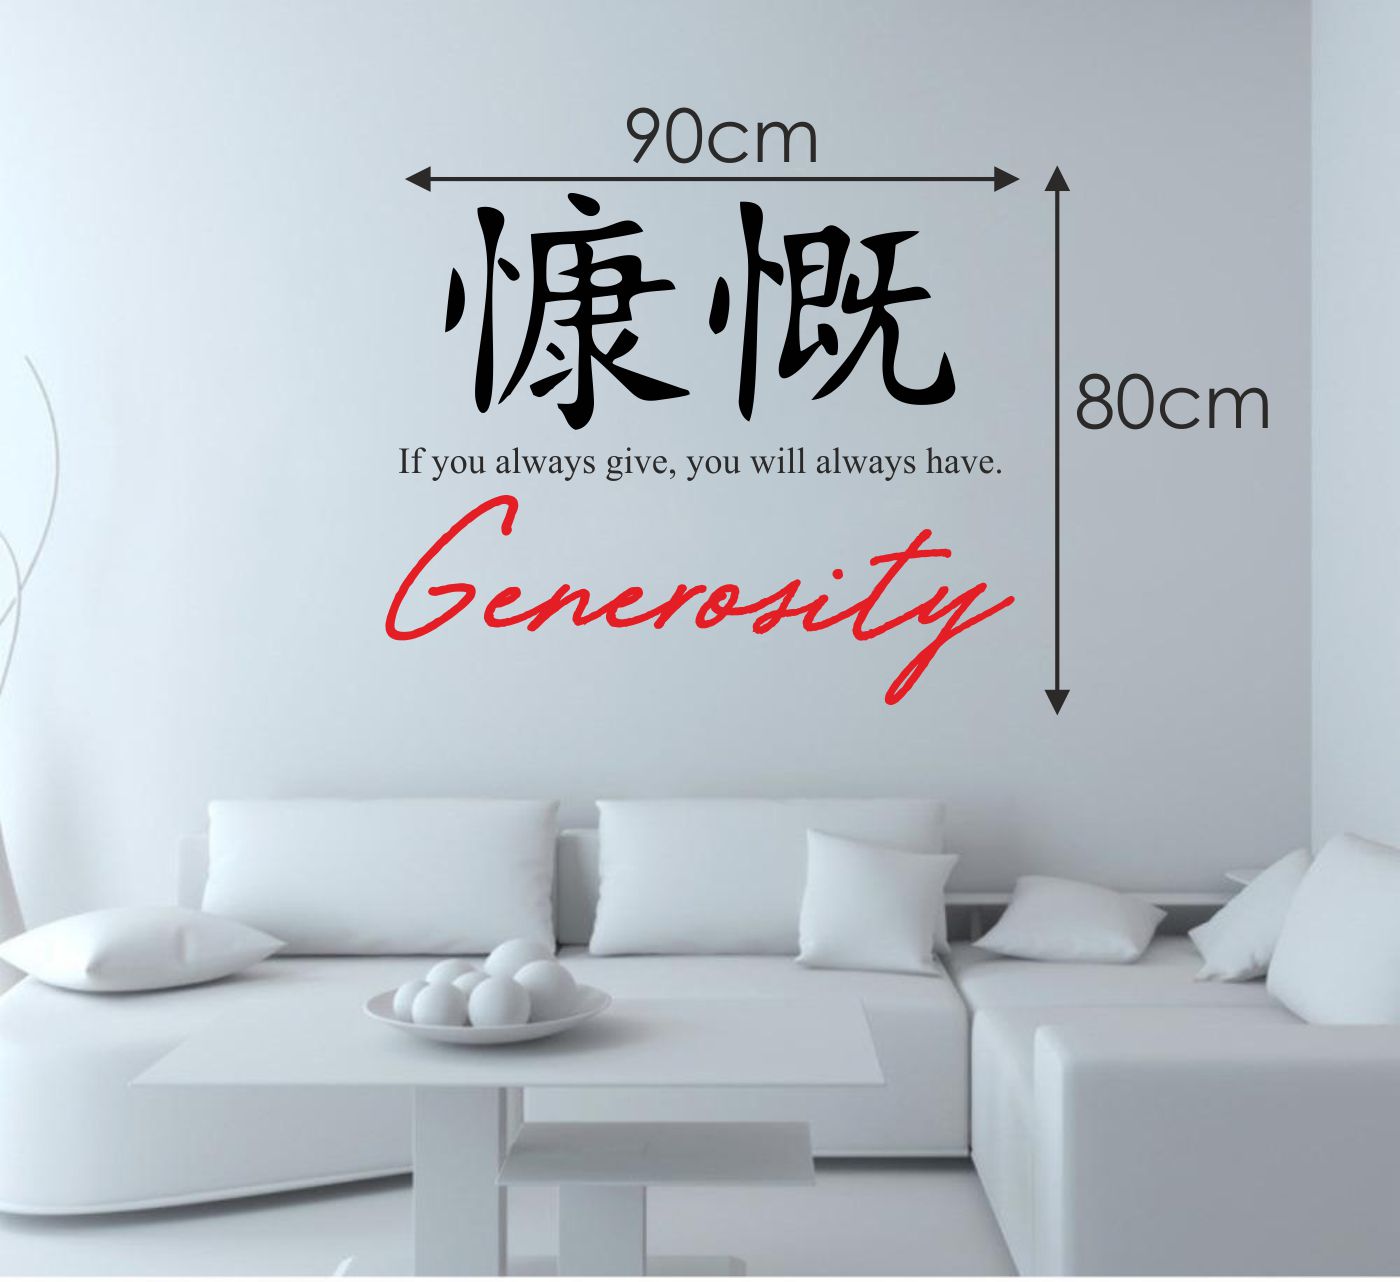 ORKA Chinese Wall Decal Sticker 2  